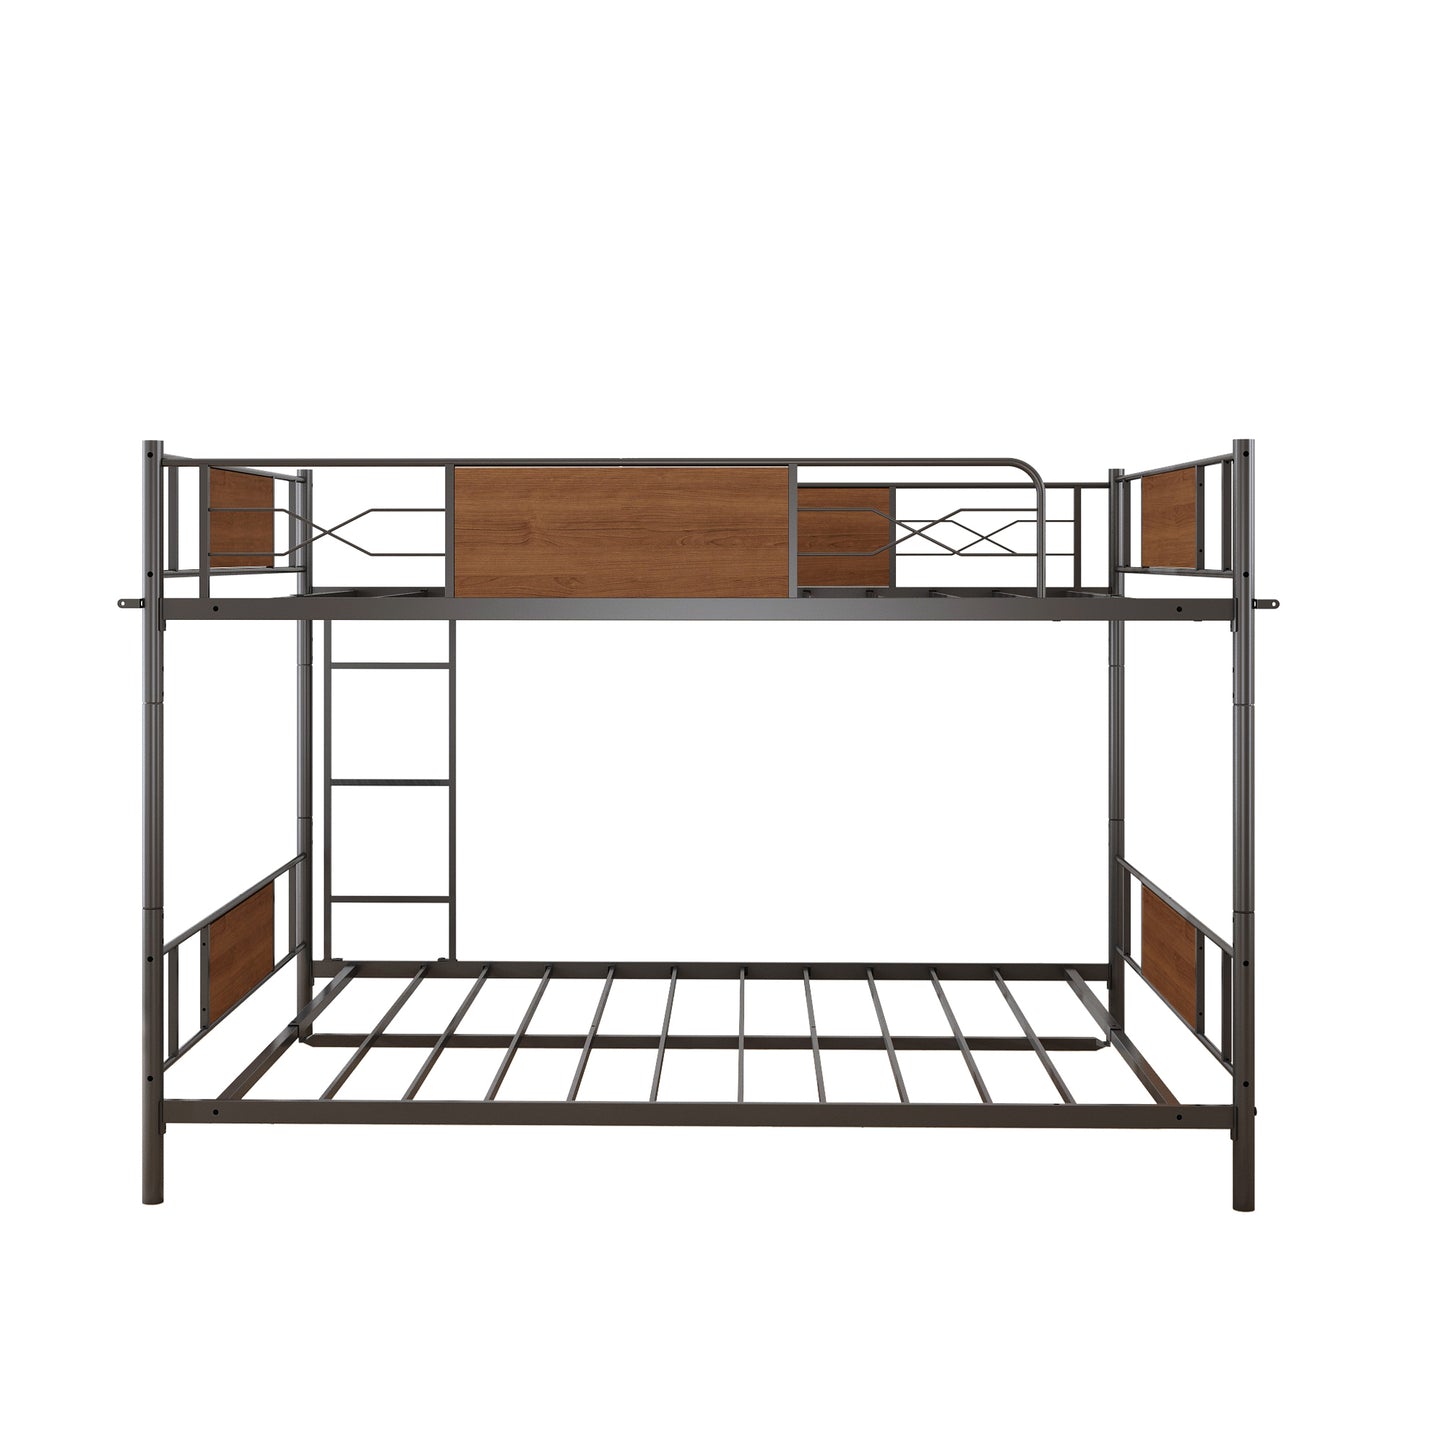 Bunk Bed Full over Full, SYNGAR Space Saver Bunk Bed with Heavy-Duty Metal Frame, Safety Guardrail & Ladder, Full Size Metal Bunk Bed Frame for Kids Boys Girls, No Box Spring Needed, C26